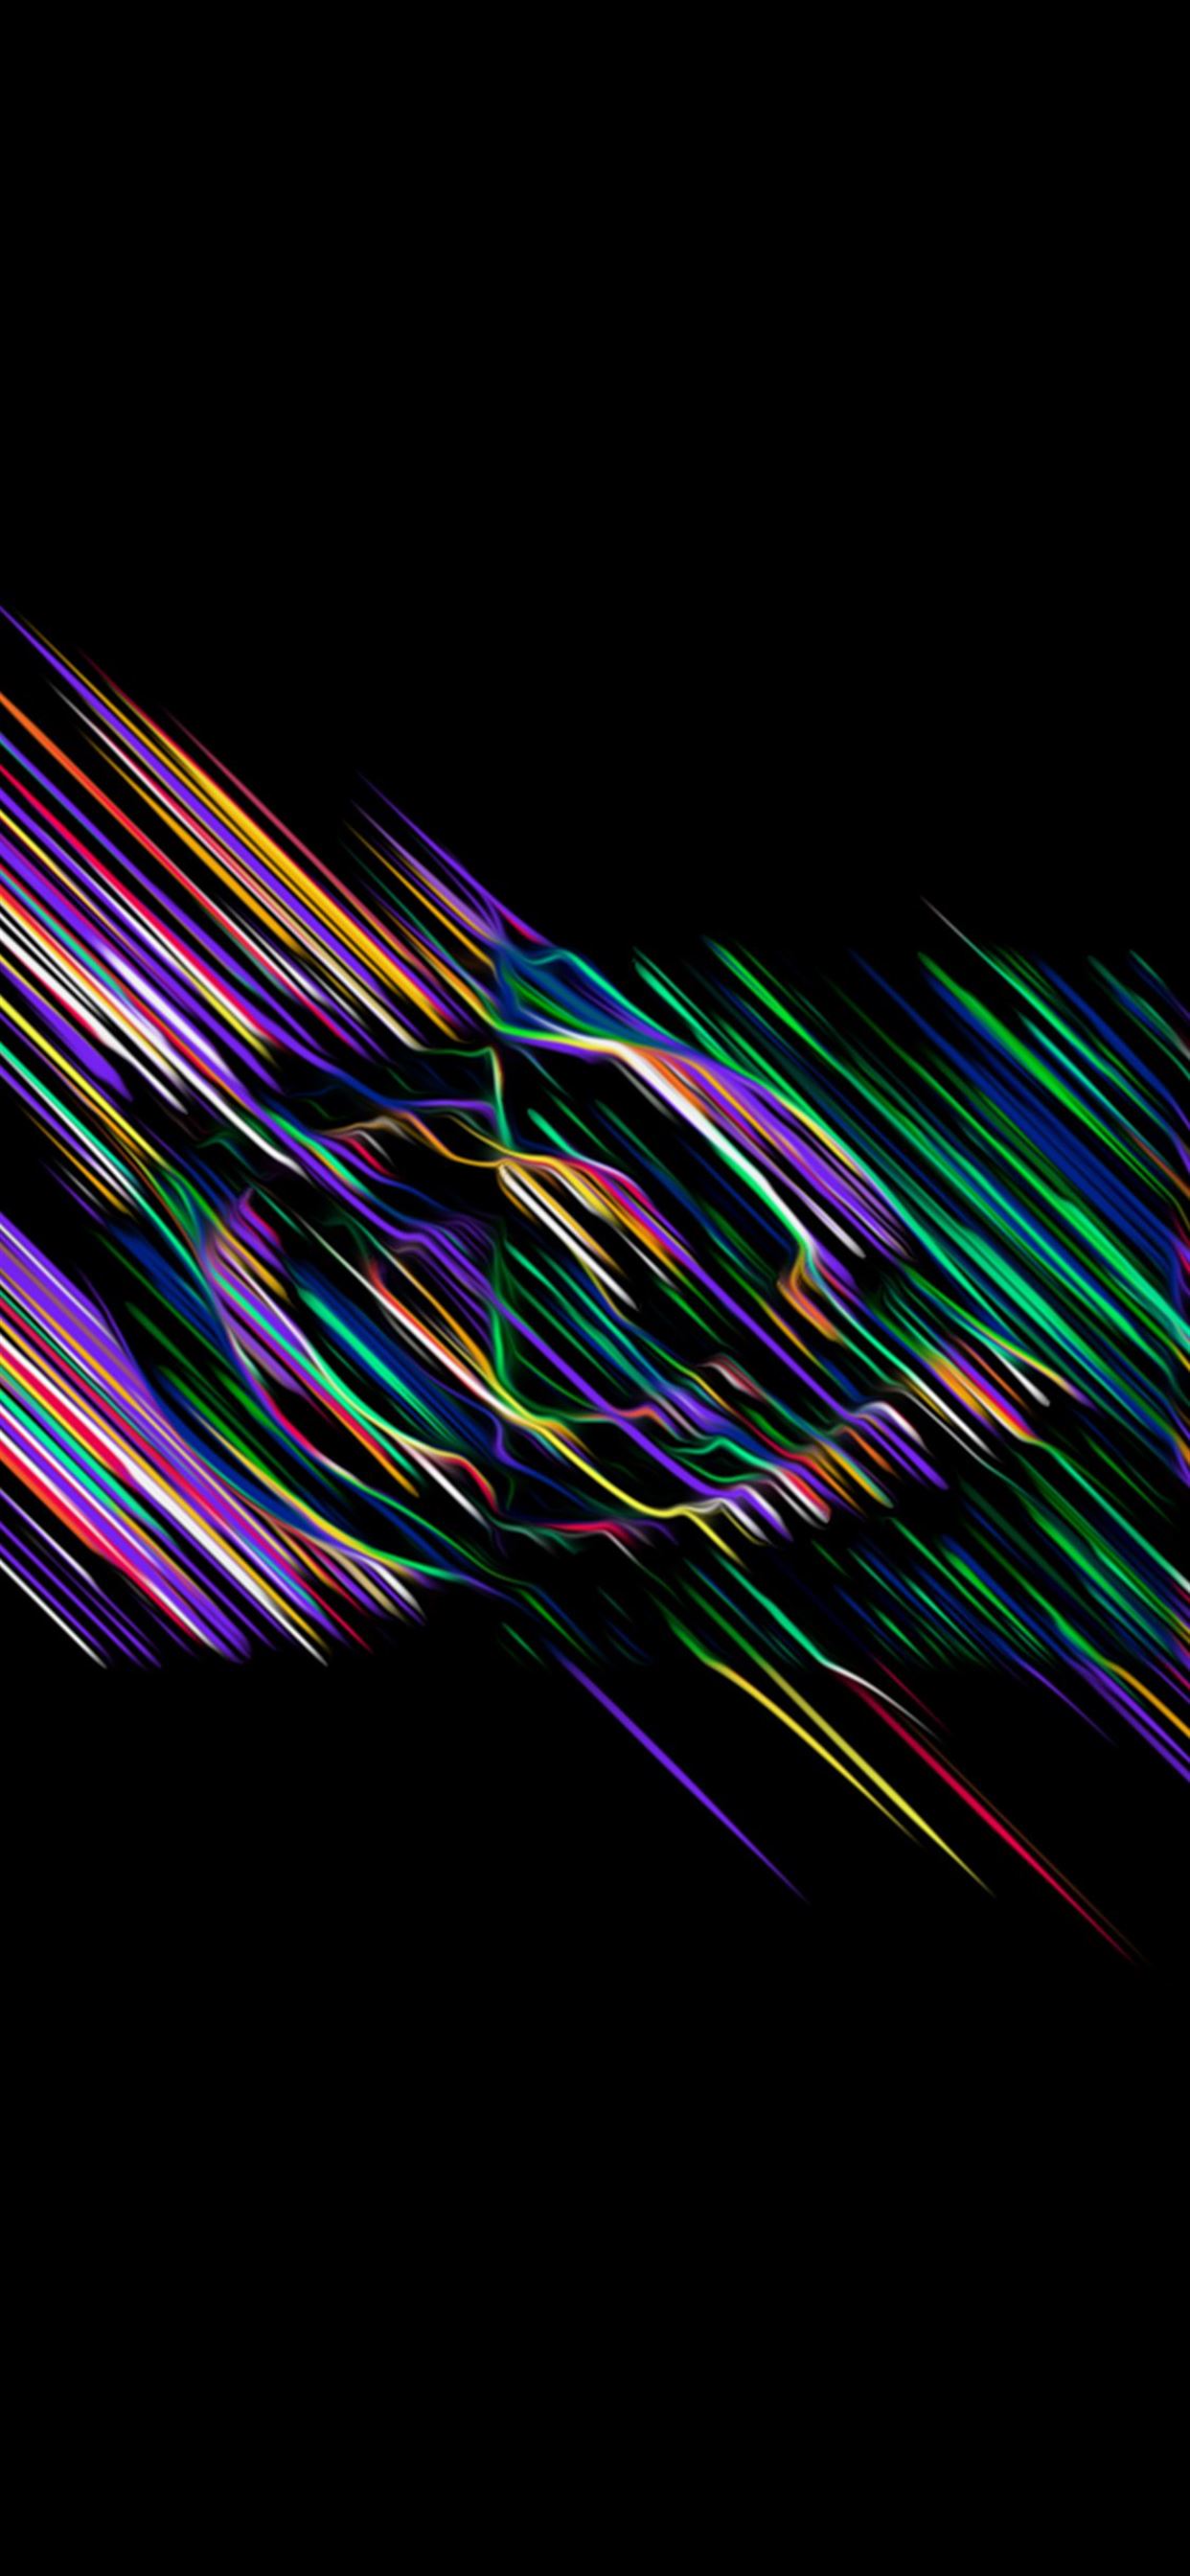 Rainbow line dark color pattern background iPhone X Wallpapers Free Download